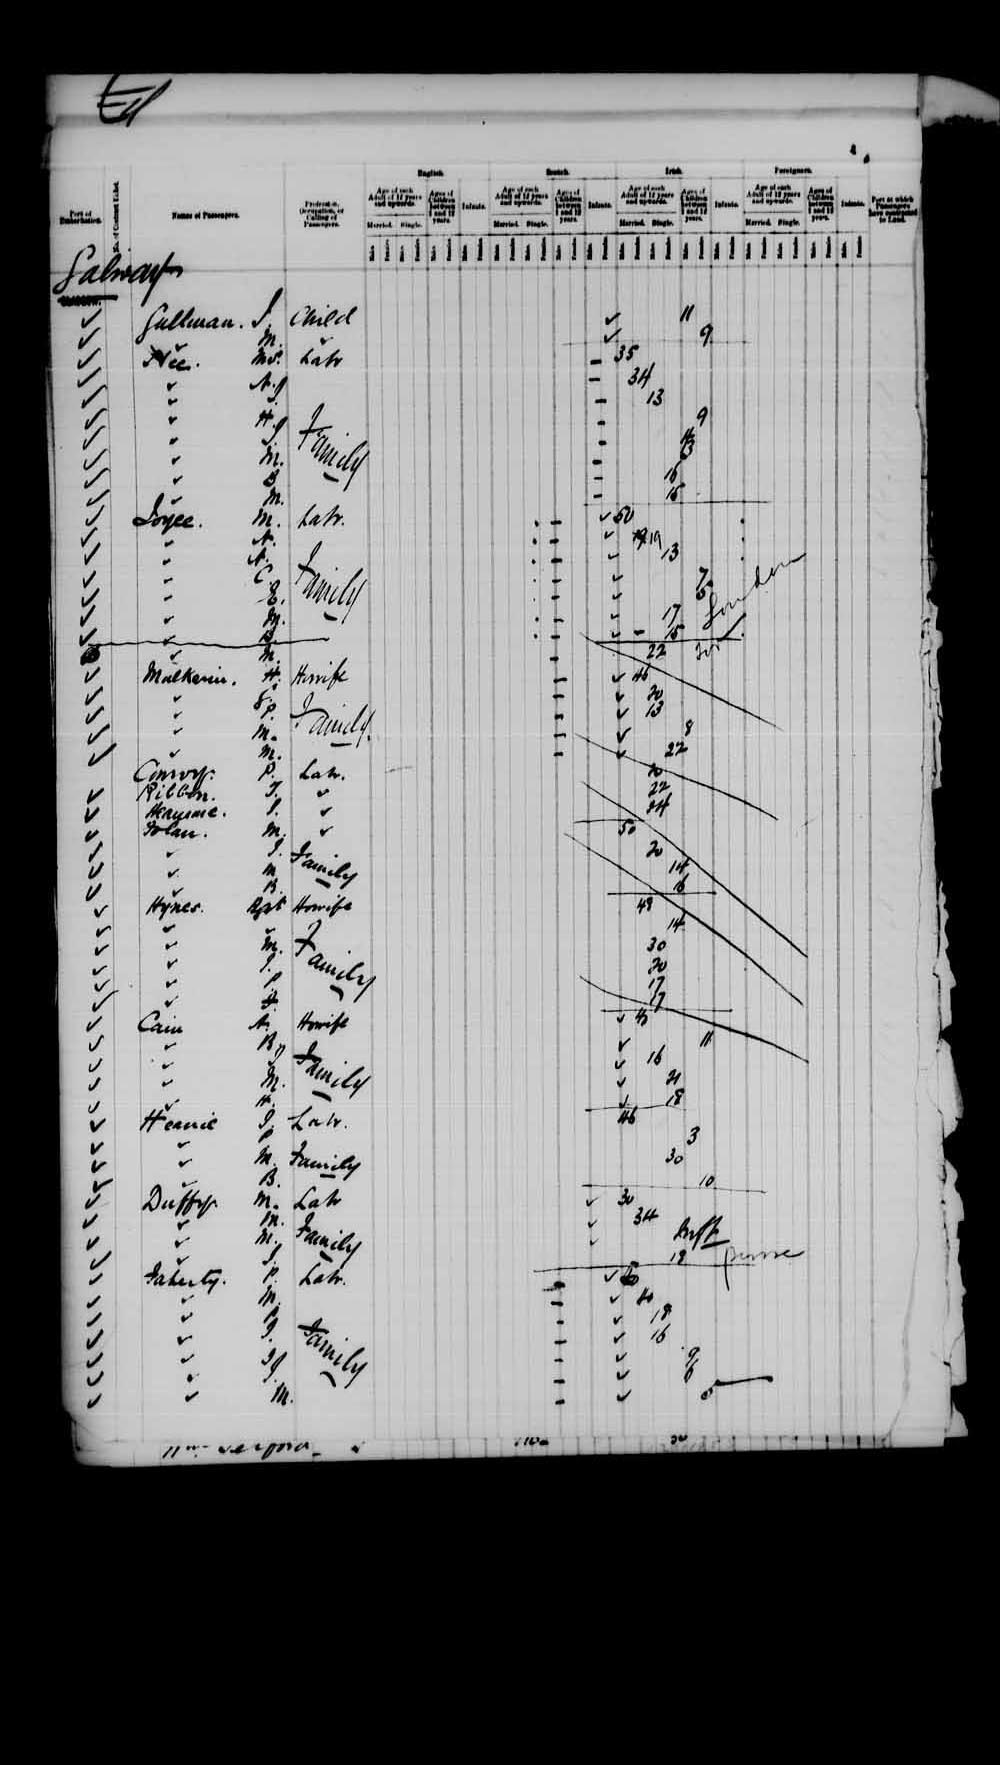 Digitized page of Passenger Lists for Image No.: e003542675